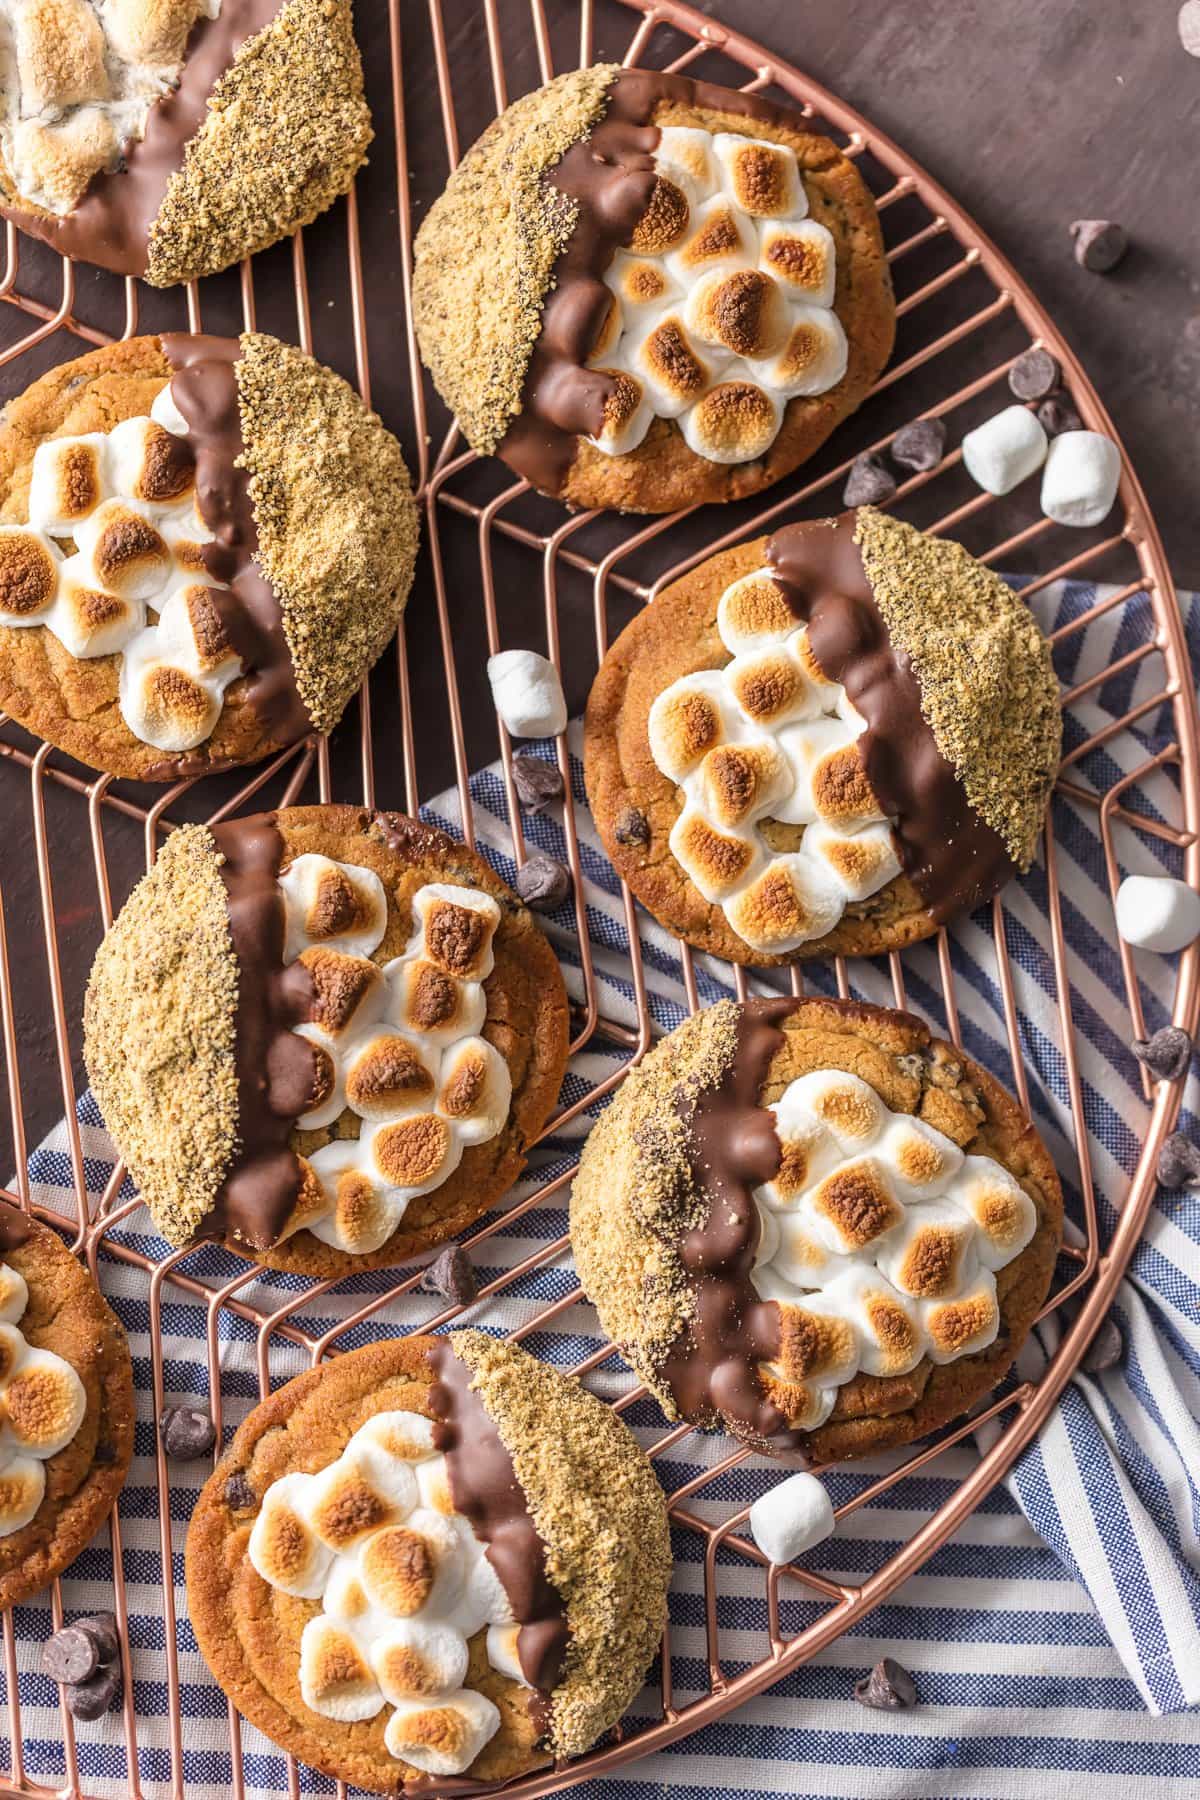 These Easy Smore Cookies are a favorite at our house for Christmas. It can be our little secret that they're made with premade refrigerated chocolate chip cookie dough, dipped in milk chocolate, then graham cracker crumbs. DIVINE!